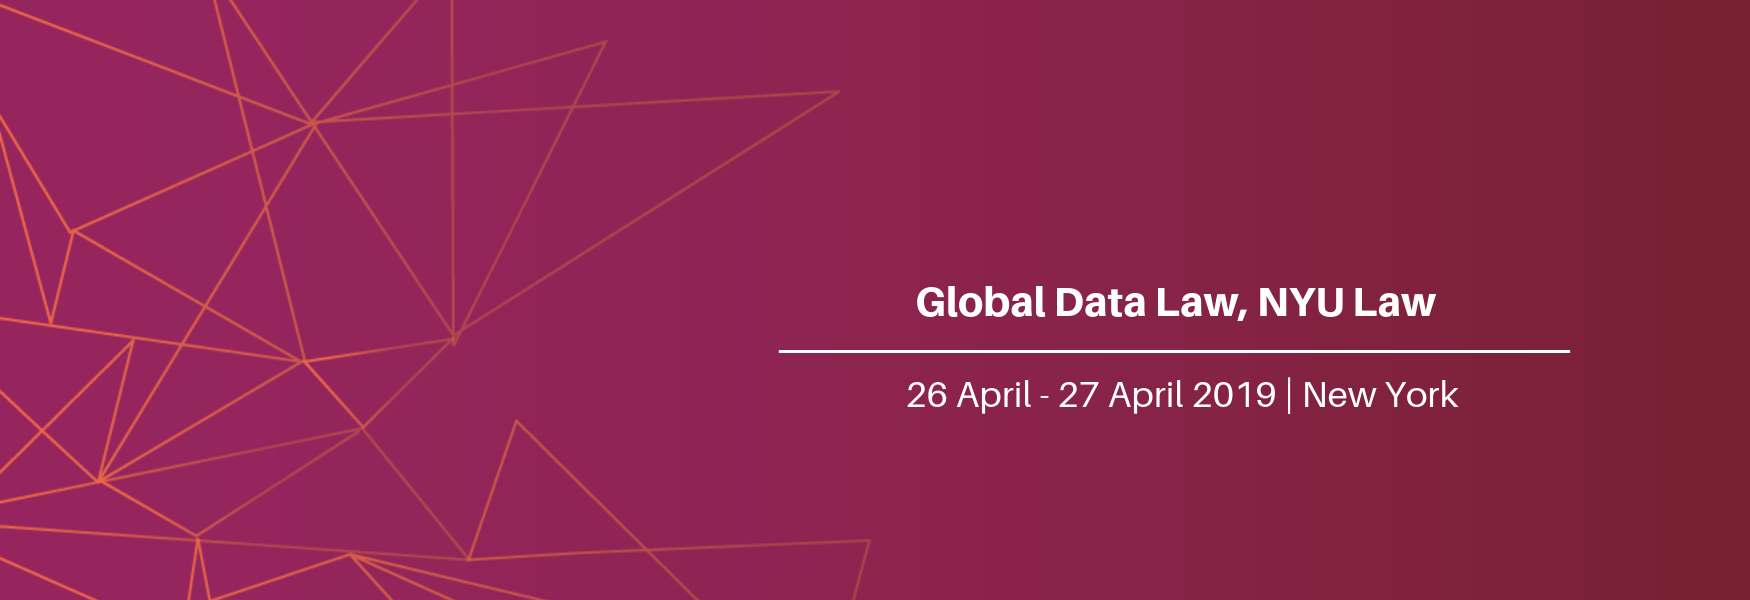 Global Data Law Conference, NYU Law